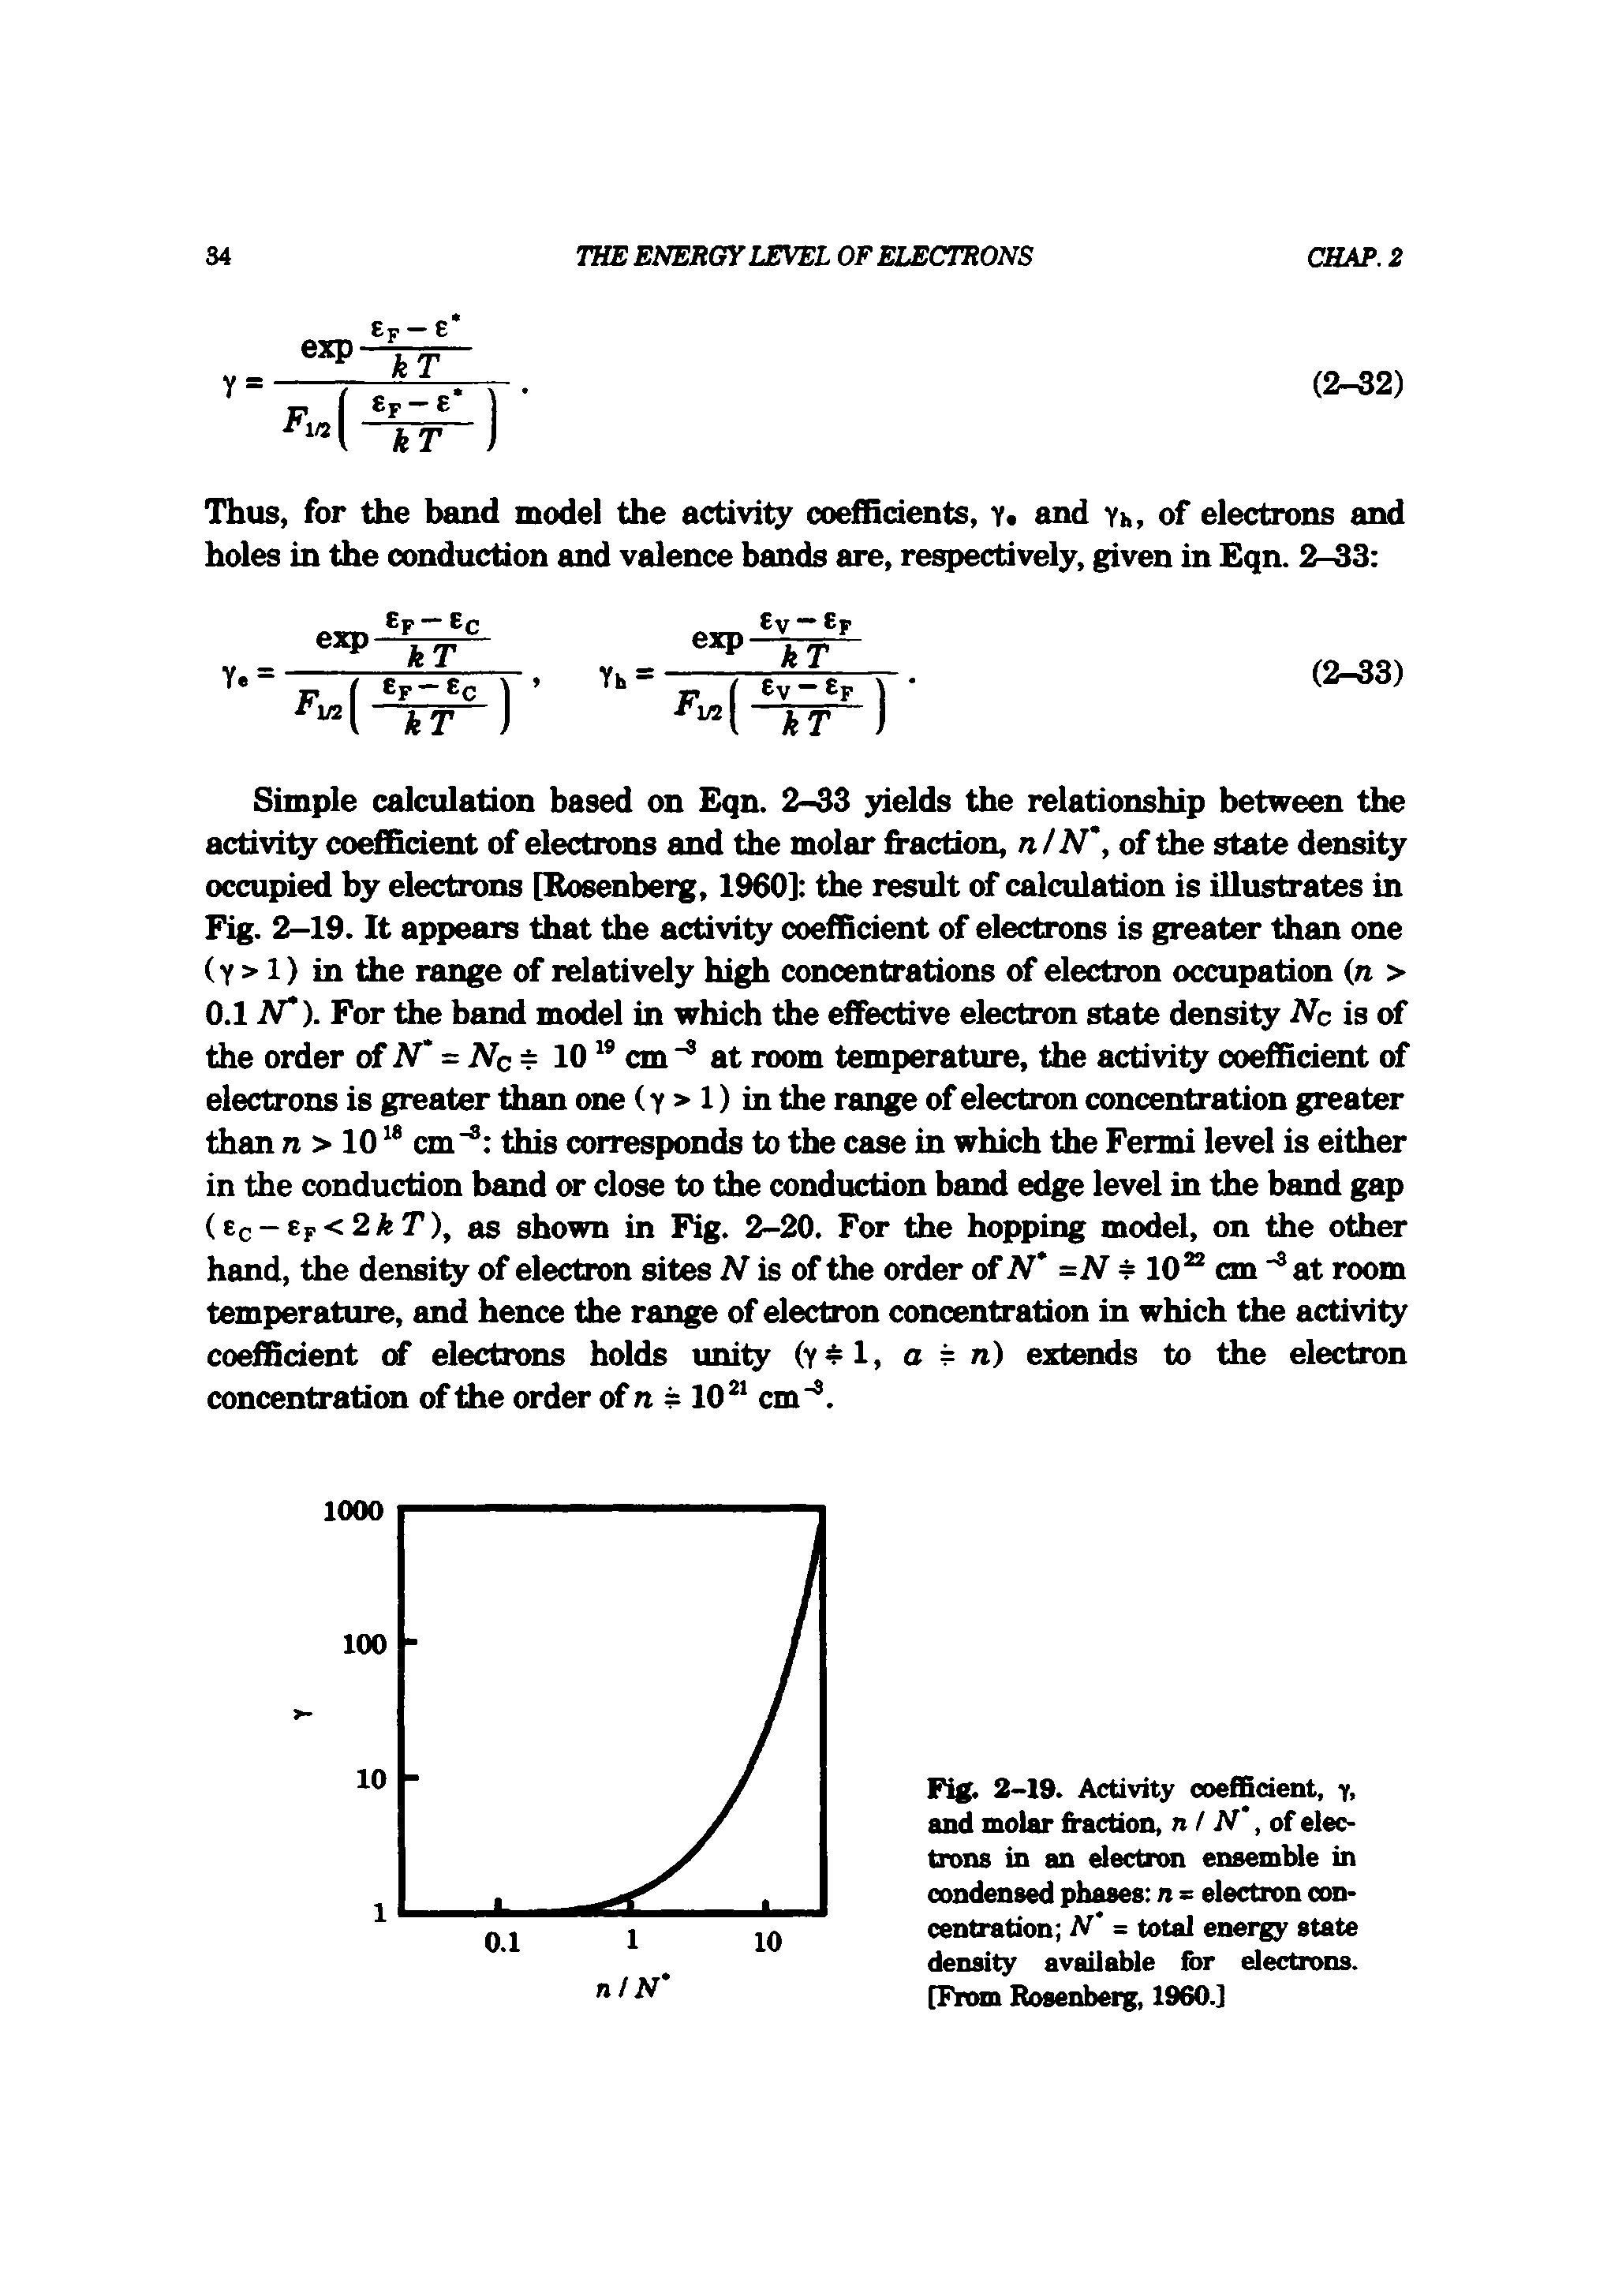 Fig. 2-19. Activity coefficient, y, and molar fraction, n/ N, of electrons in an electron ensemble in condensed phases n - electron concentration N = total energy state density available for electrons. [From Rosenberg, I960.]...